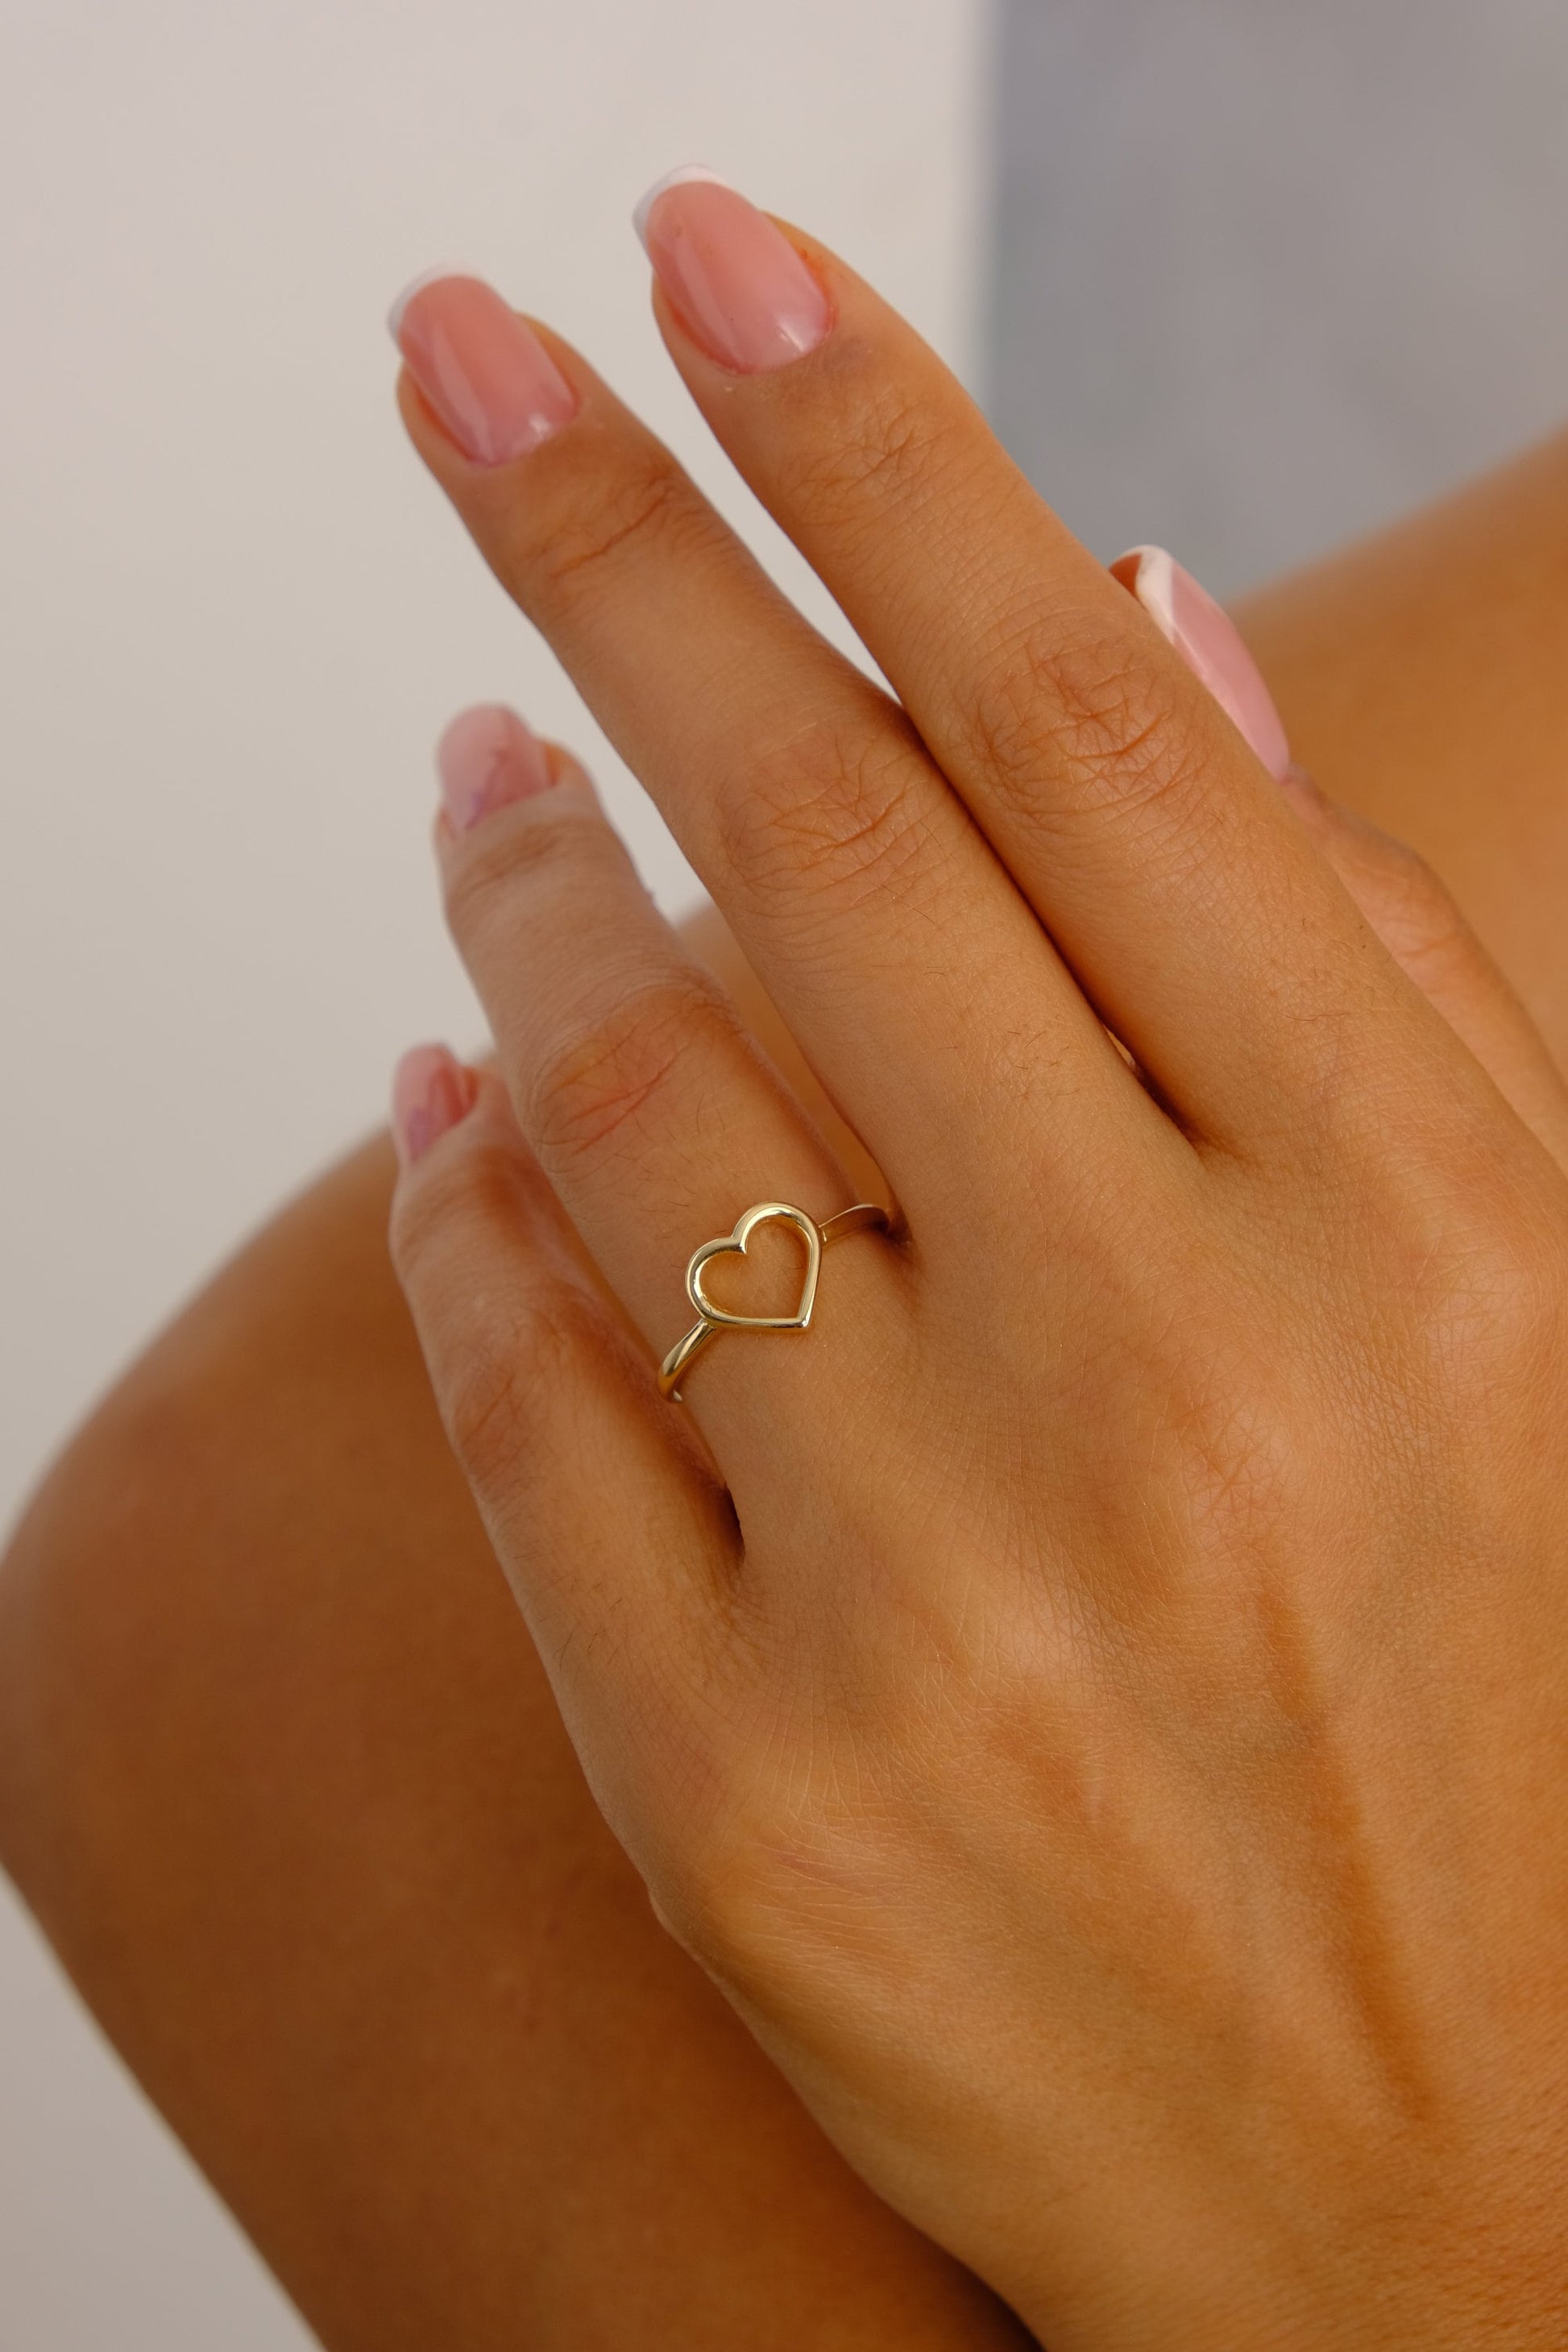 14K Gold Heart Ring, Open Heart Ring, Dainty Gold Band Ring, Love Heart Ring, Promise Ring, Minimalist ring, Heart Gold Ring, Best Friend